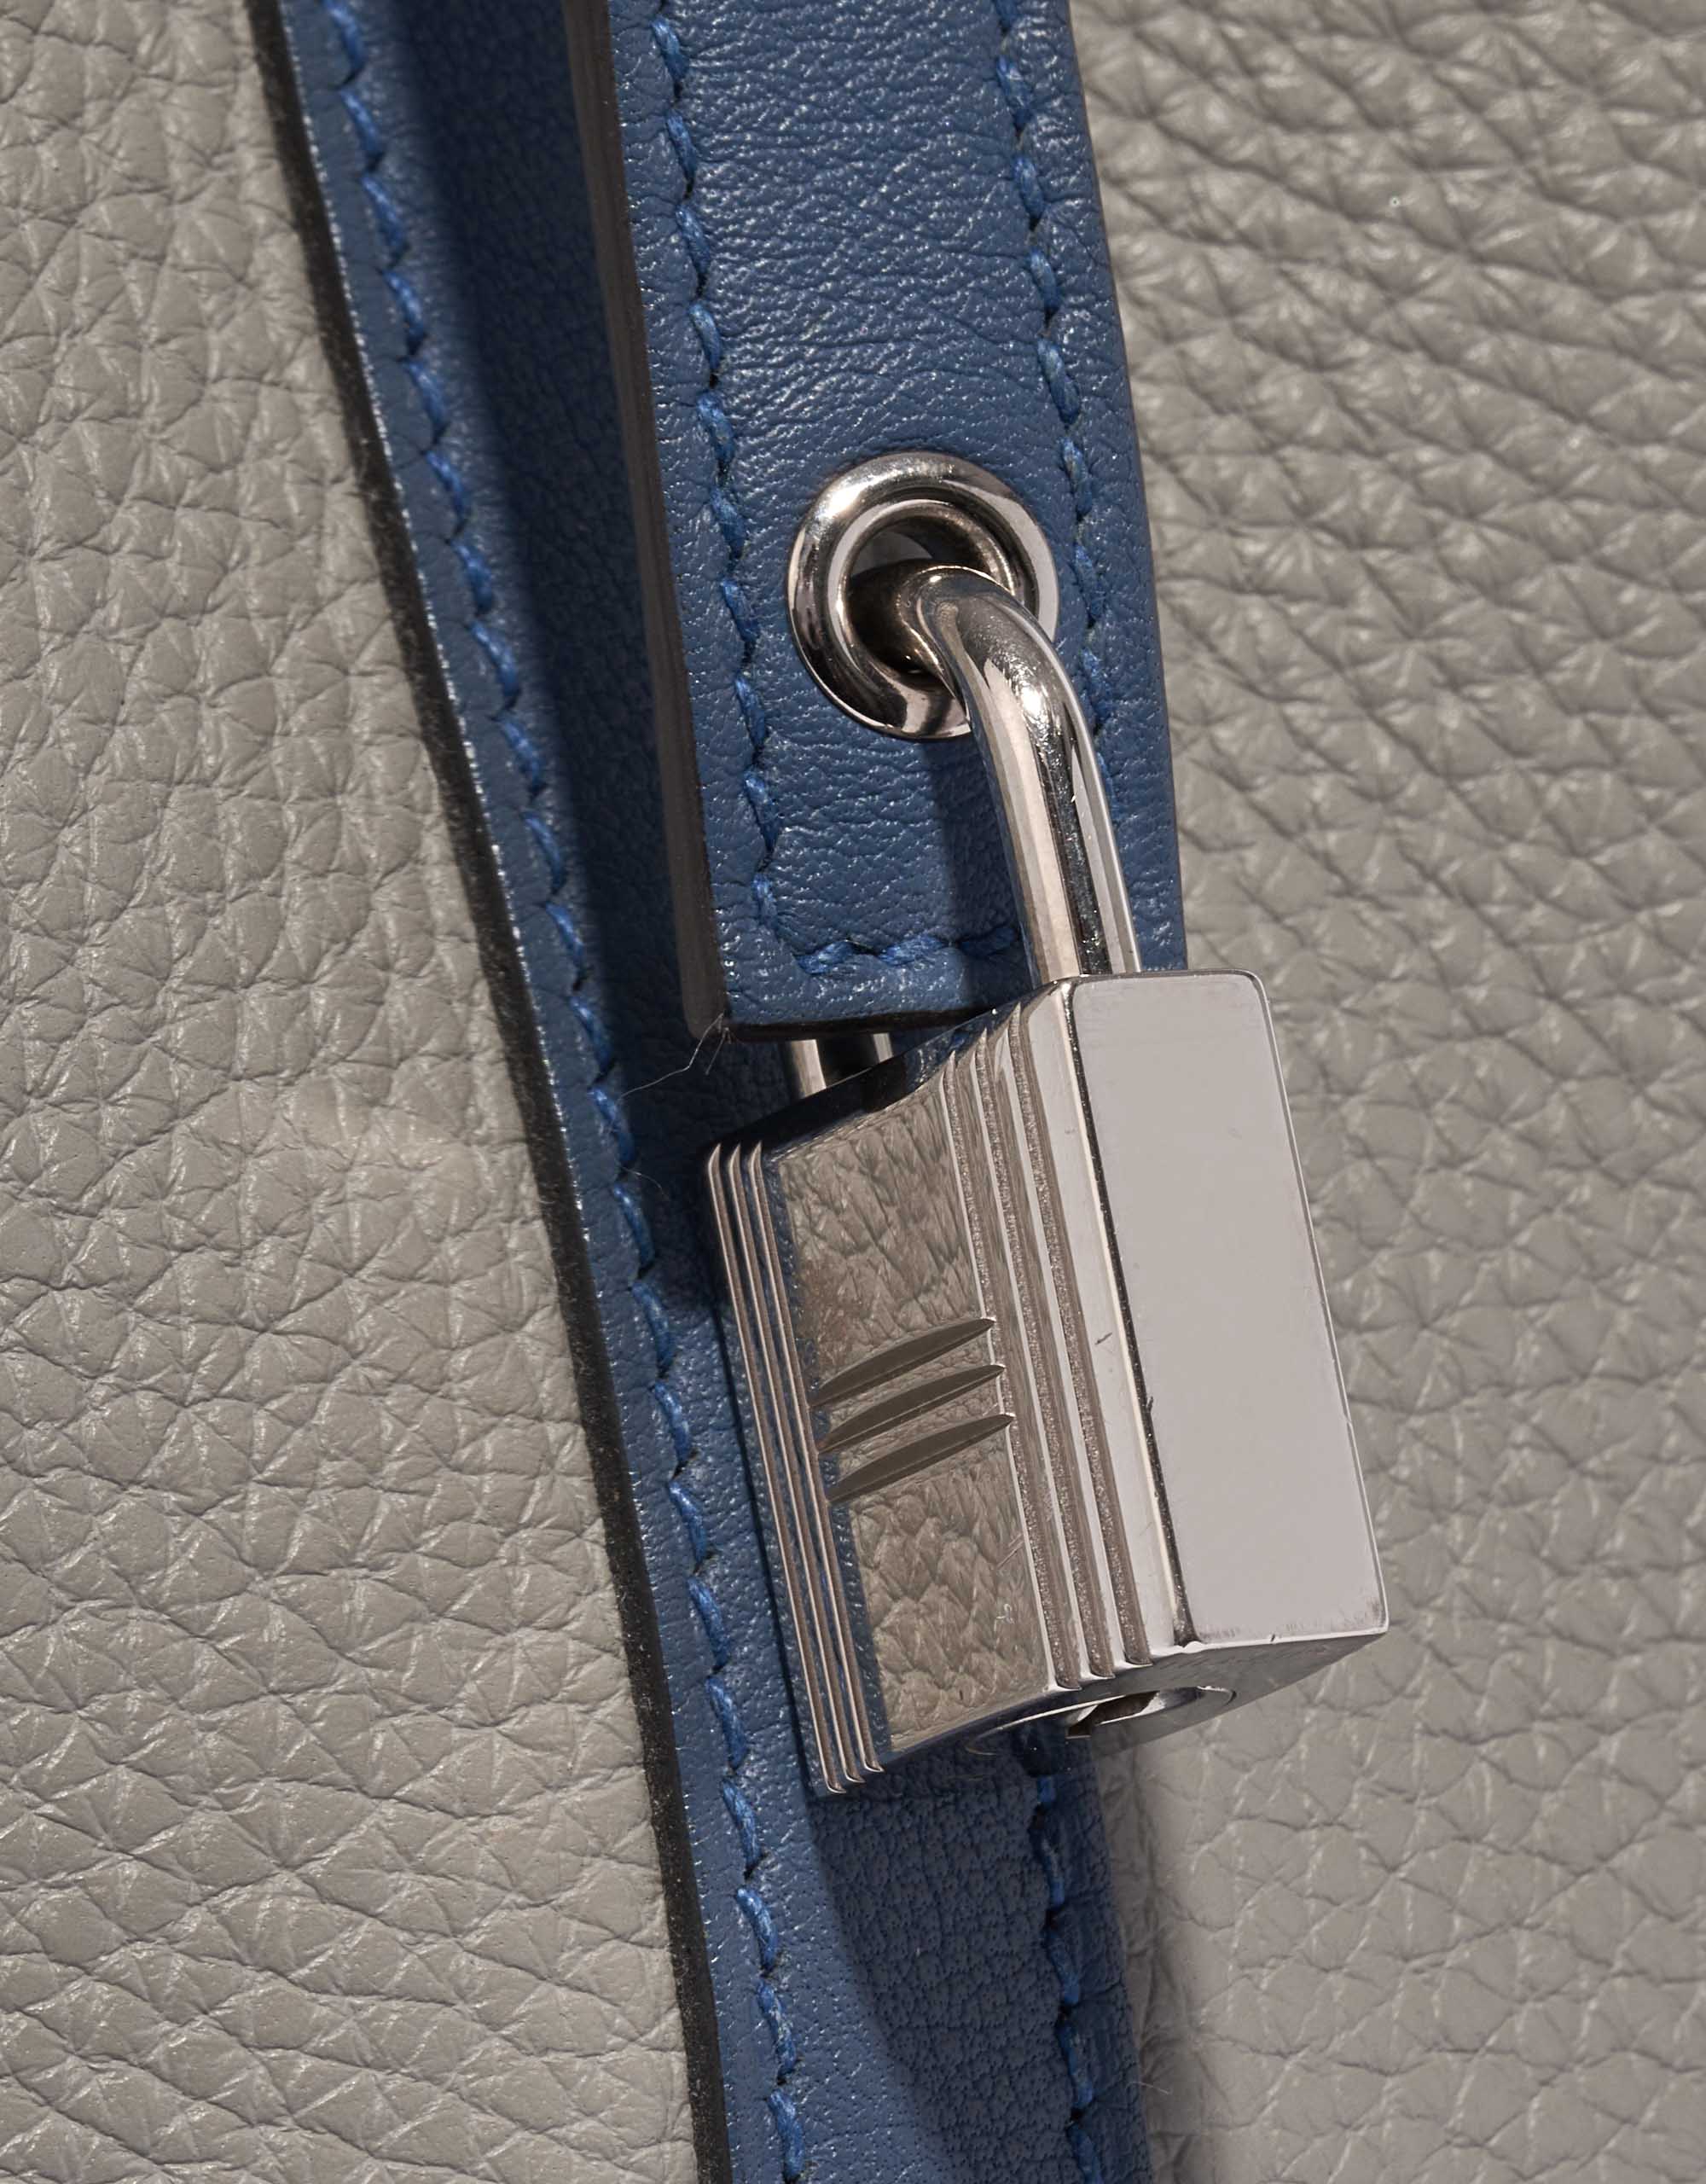 Pre-owned Hermès bag Picotin 18 Clemence / Swift Gris Mouette / Blue Agate Blue Closing System | Sell your designer bag on Saclab.com